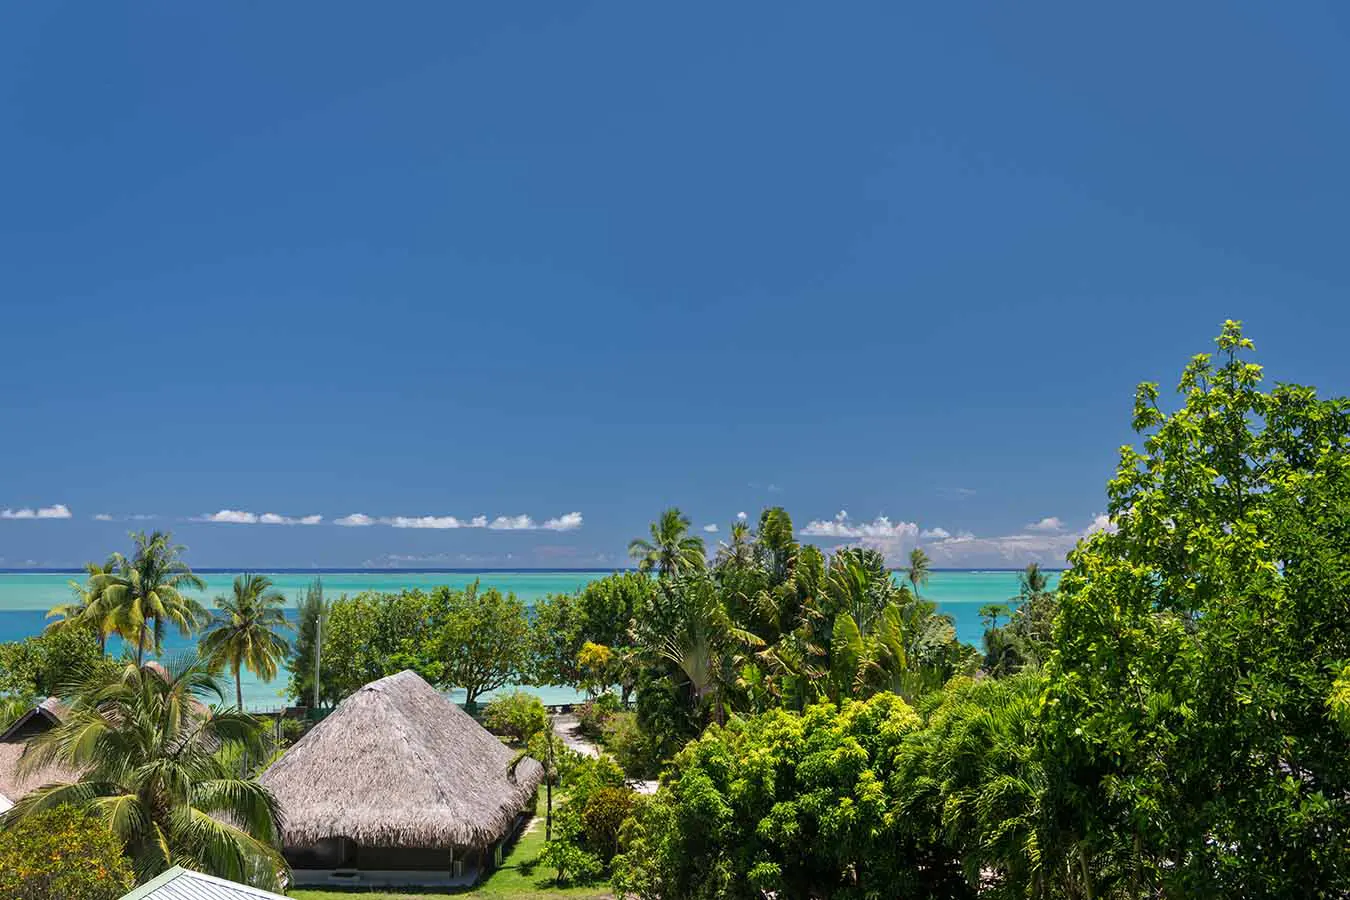 View from the terrace of the lagoon in our Bora Bora vacation home